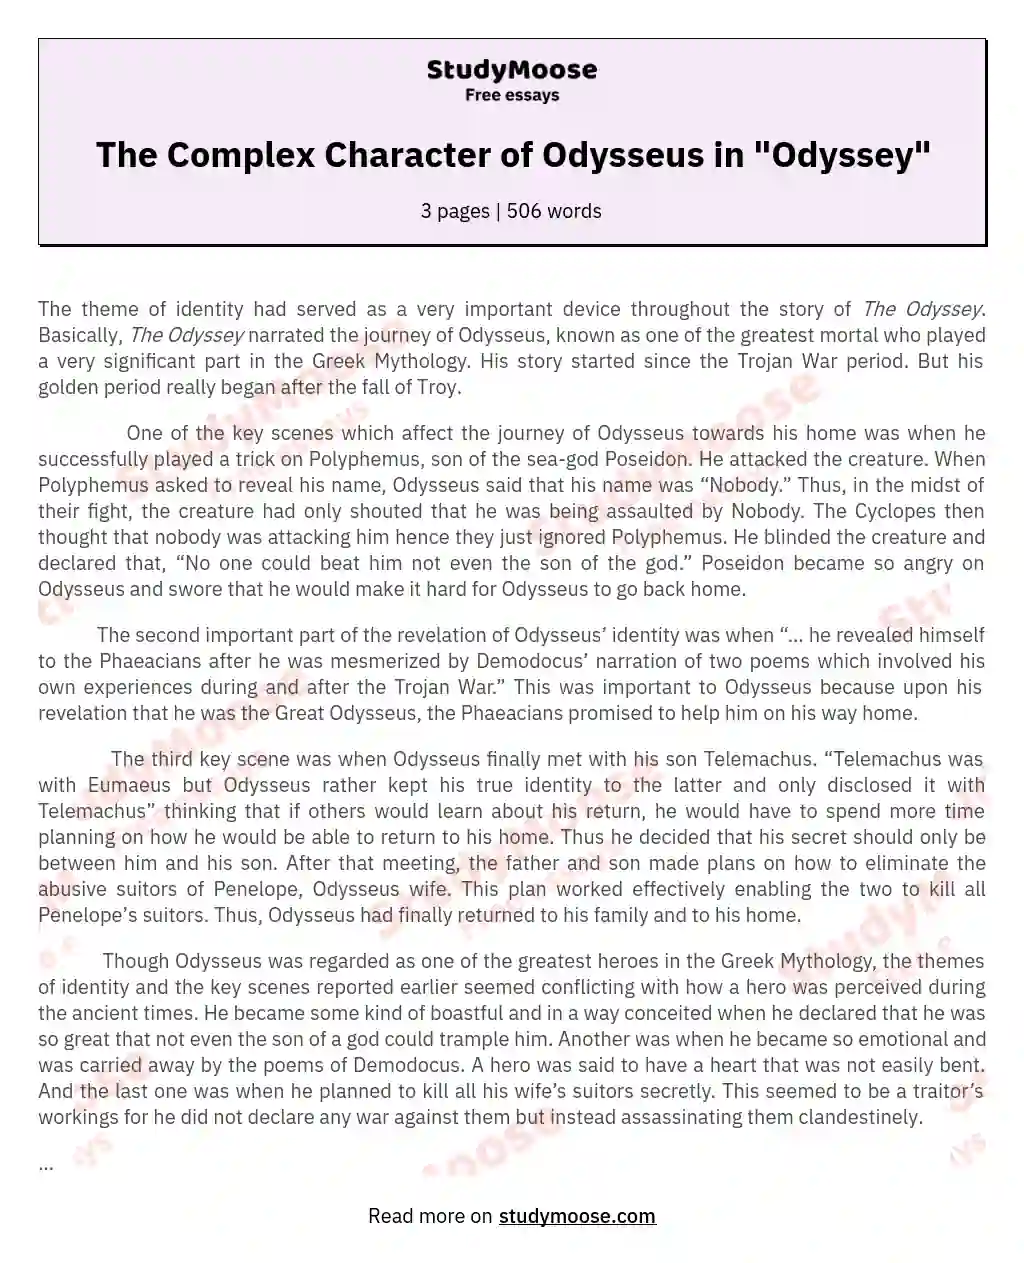 The Complex Character of Odysseus in "Odyssey" essay